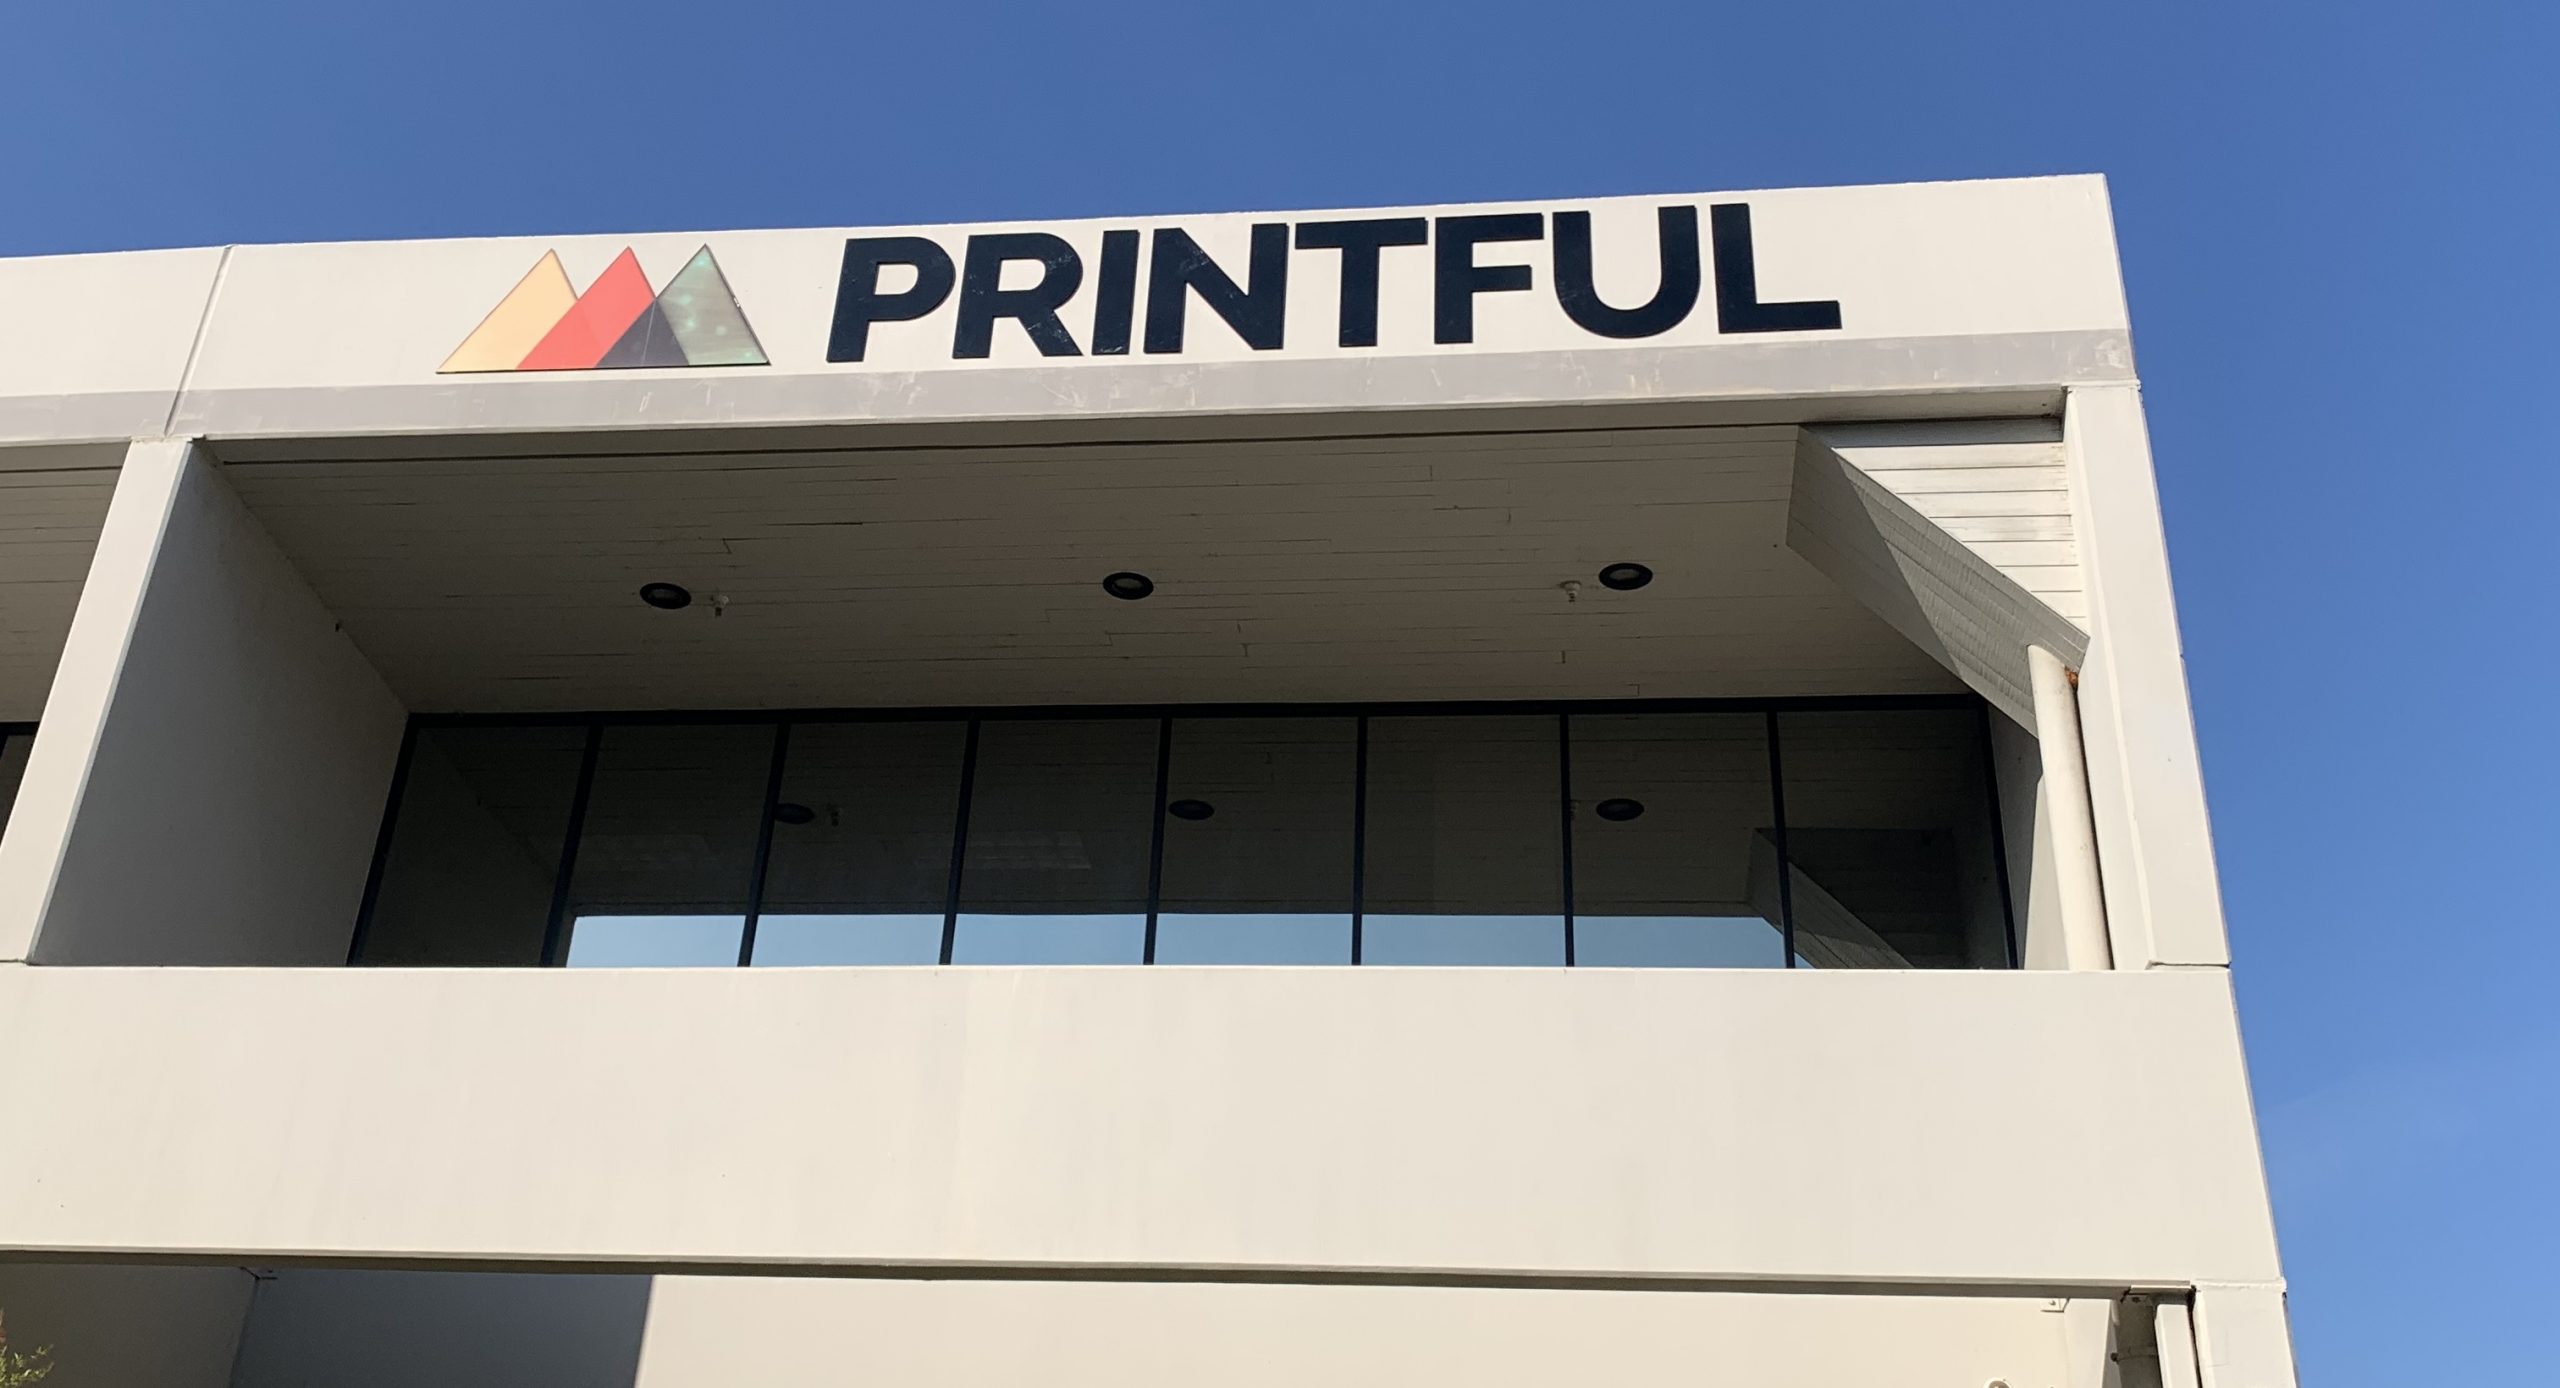 Like your car, sometimes your sign just needs a cleaning. We provided sign cleaning for Printful. With this, the Chatsworth company's signage looks spotless and will continue attracting customers.